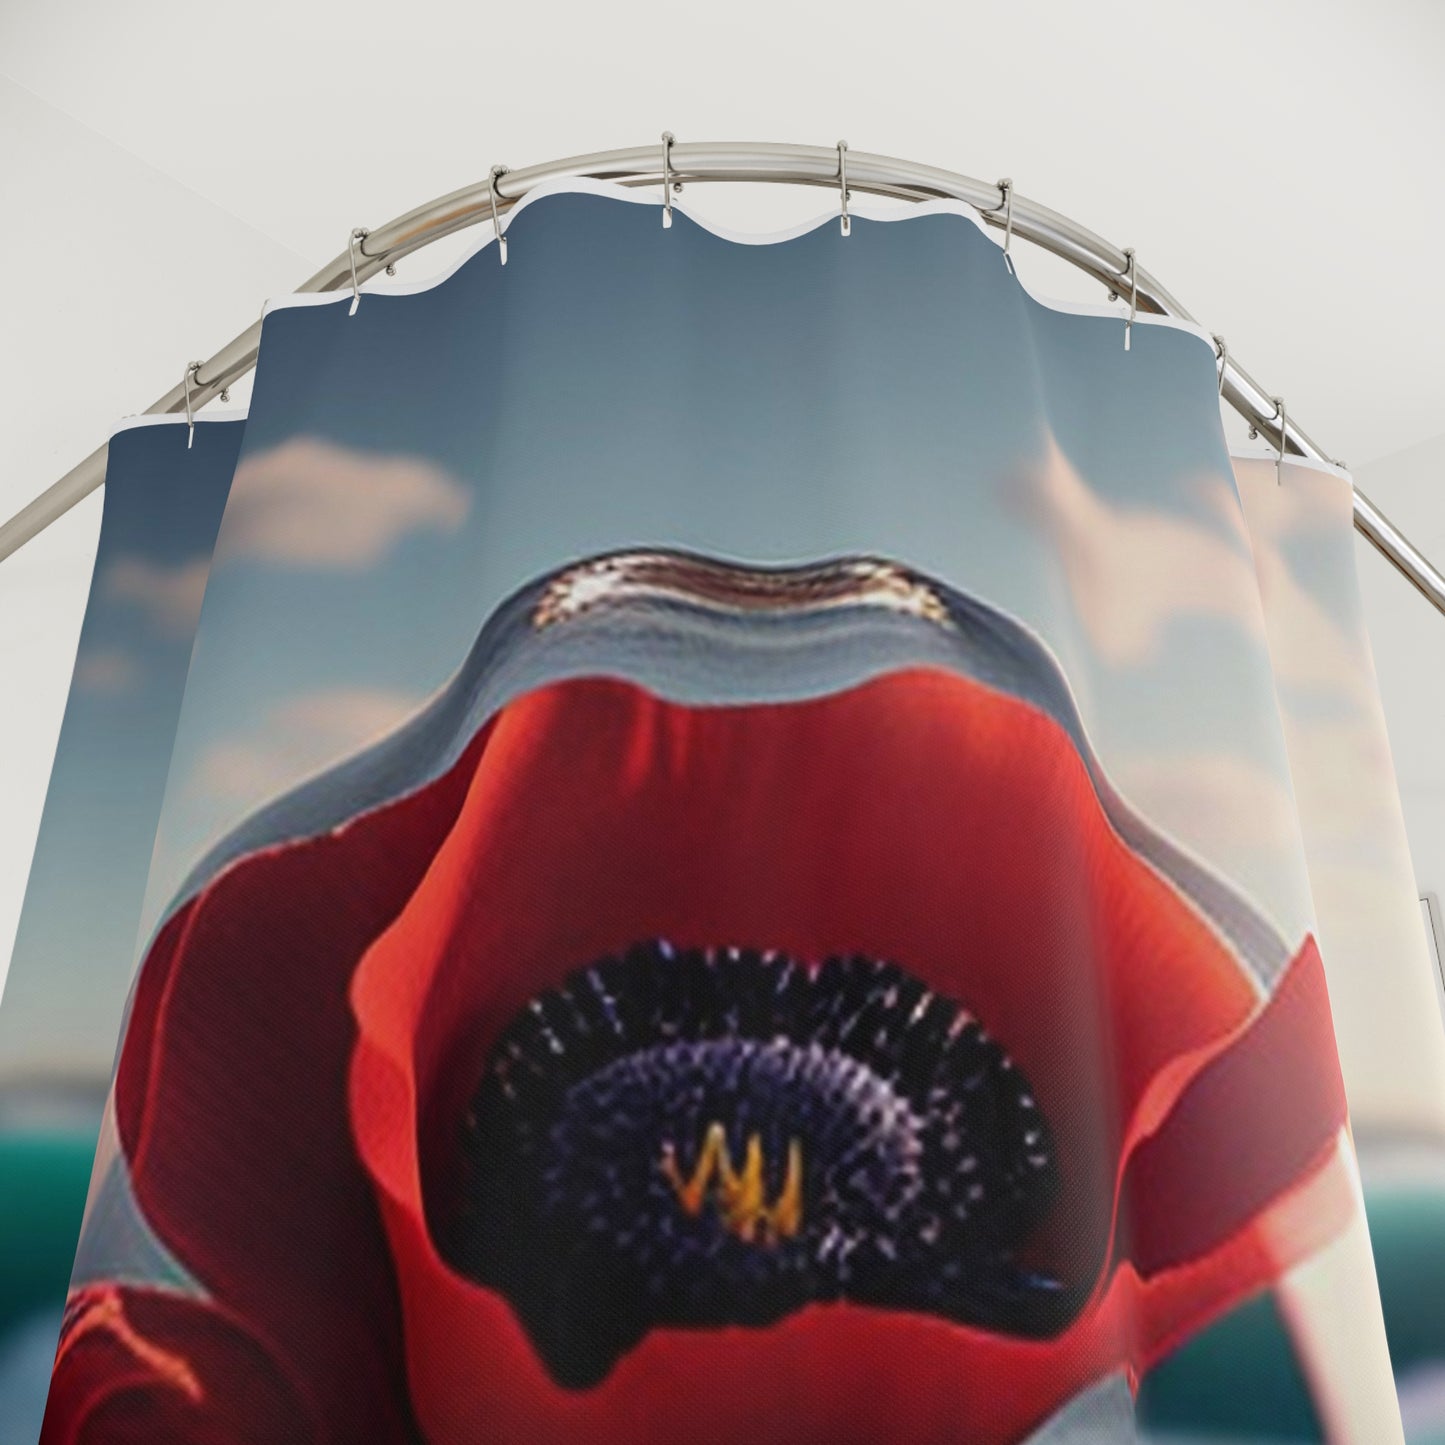 Polyester Shower Curtain Red Anemone in a Vase 4